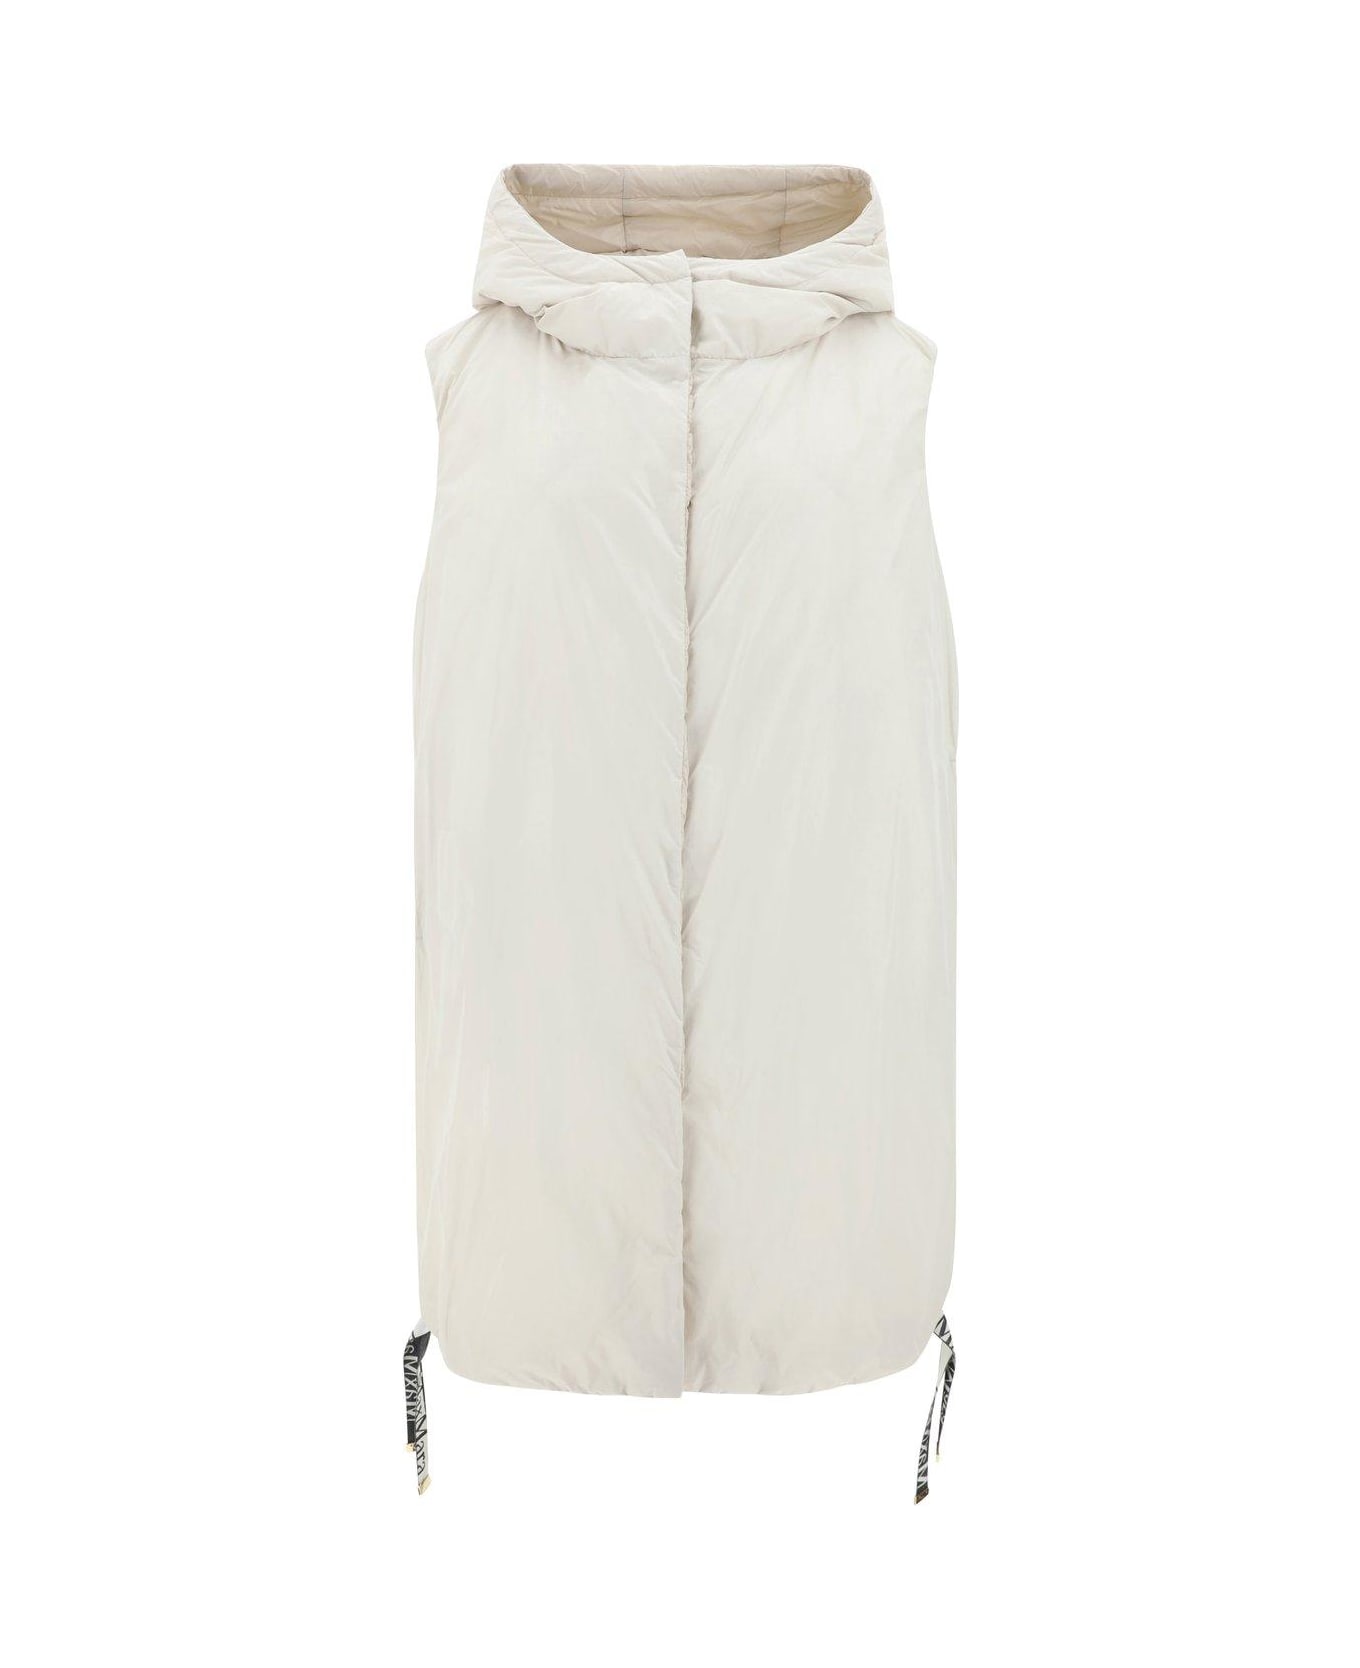 Max Mara The Cube Quilted Down Vest - SAND